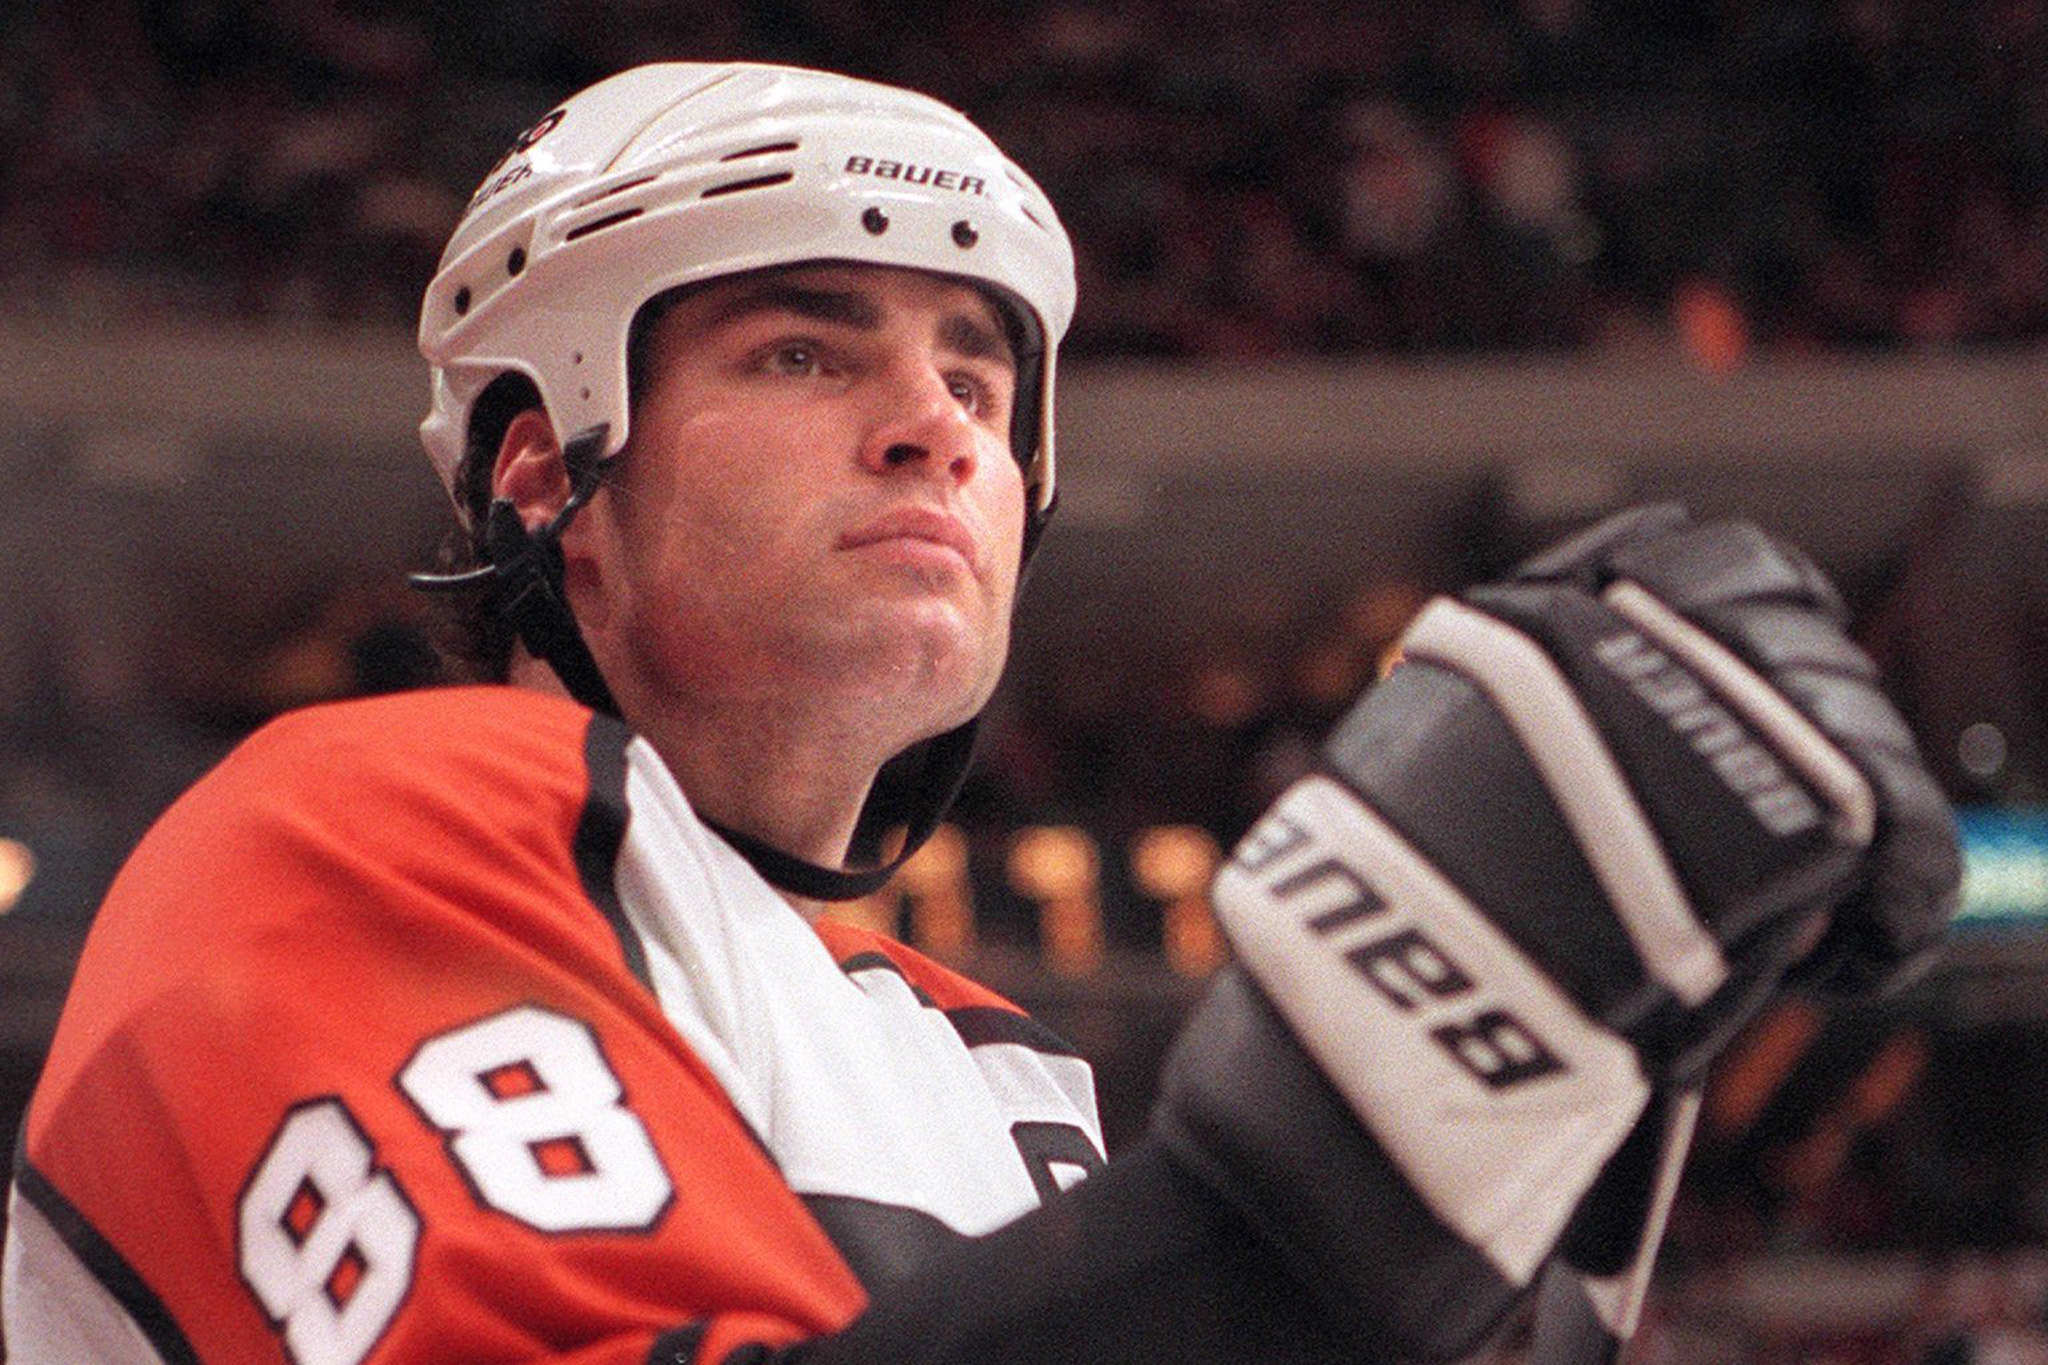 When Eric Lindros welcomed Peter Forsberg to the NHL in the most